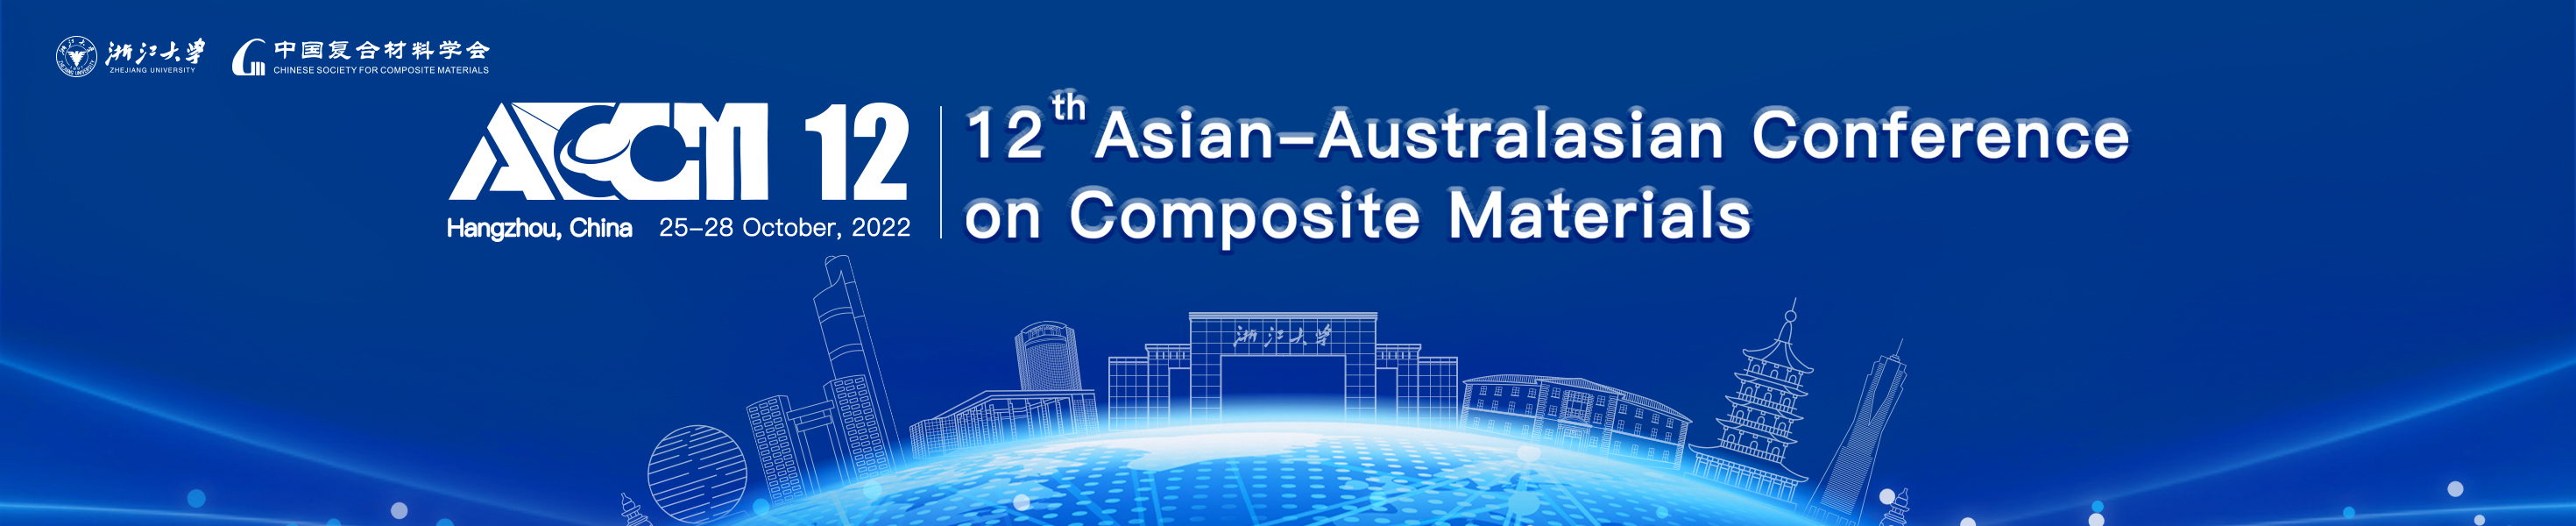 The 12th Asian-Australasian Conference on Composite Materials，ACCM12